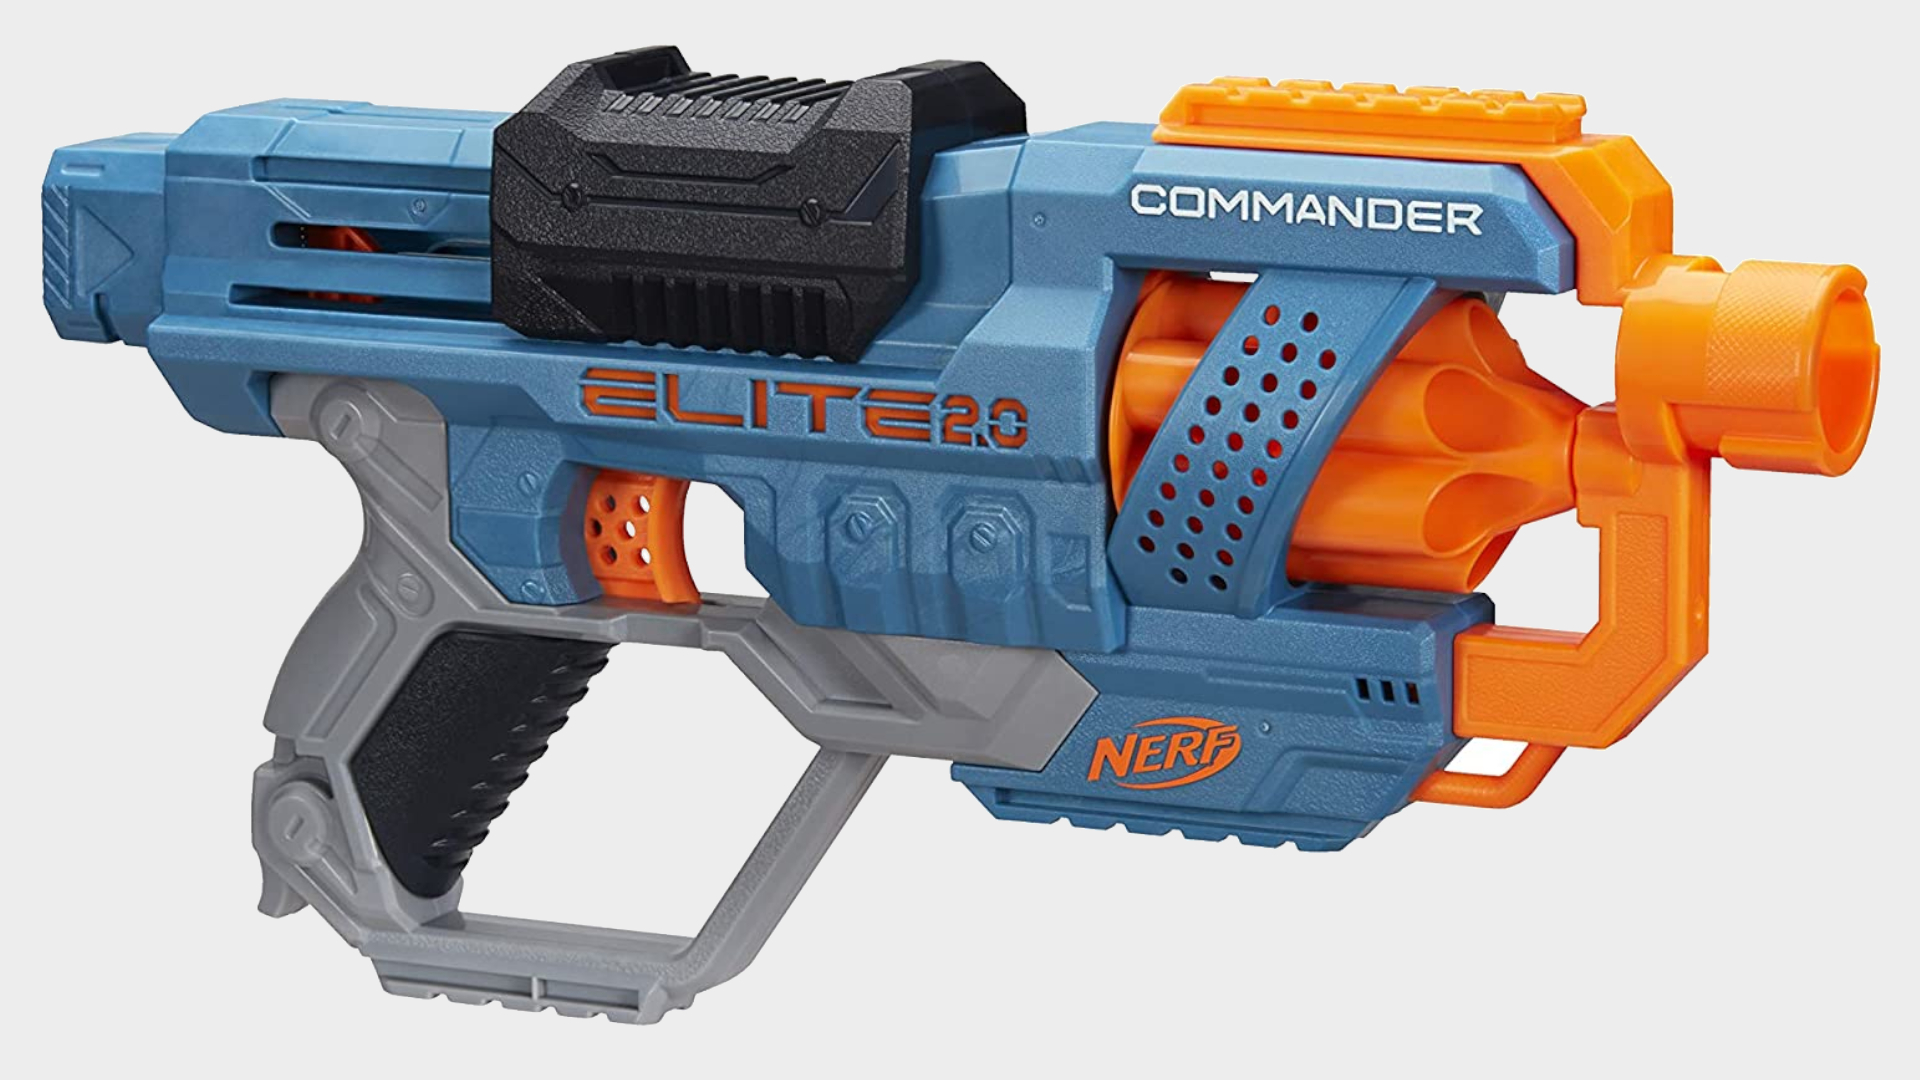 The best Nerf guns to buy in 2022 - Mobitool